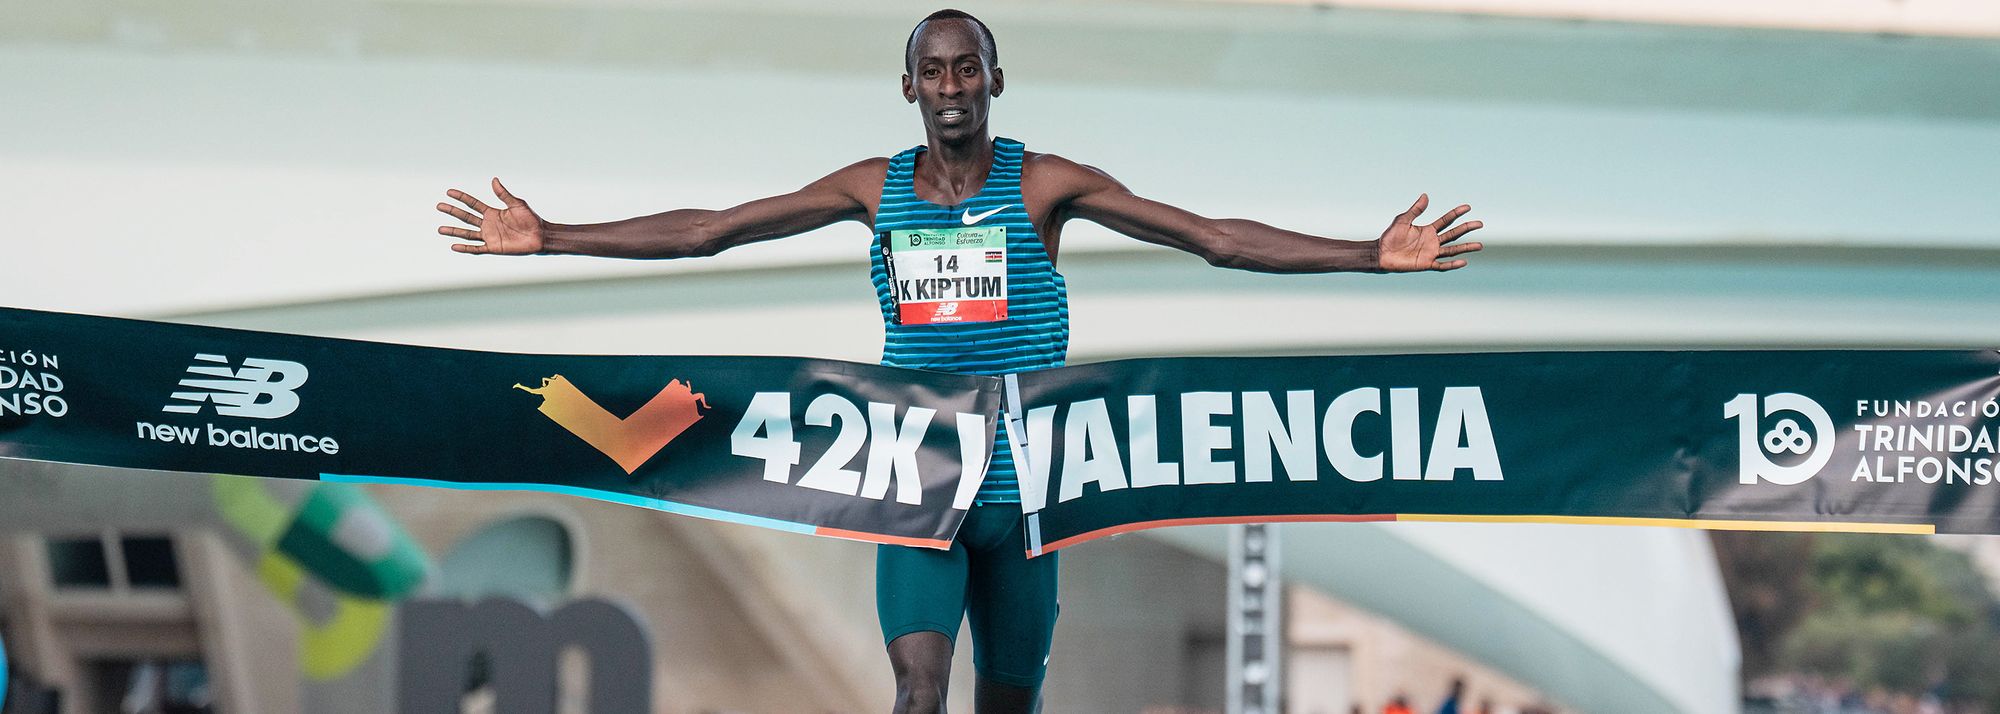 Kiptum clocks 2:01:53, fastest debut in history, while Beriso sets Ethiopian record of 2:14:58